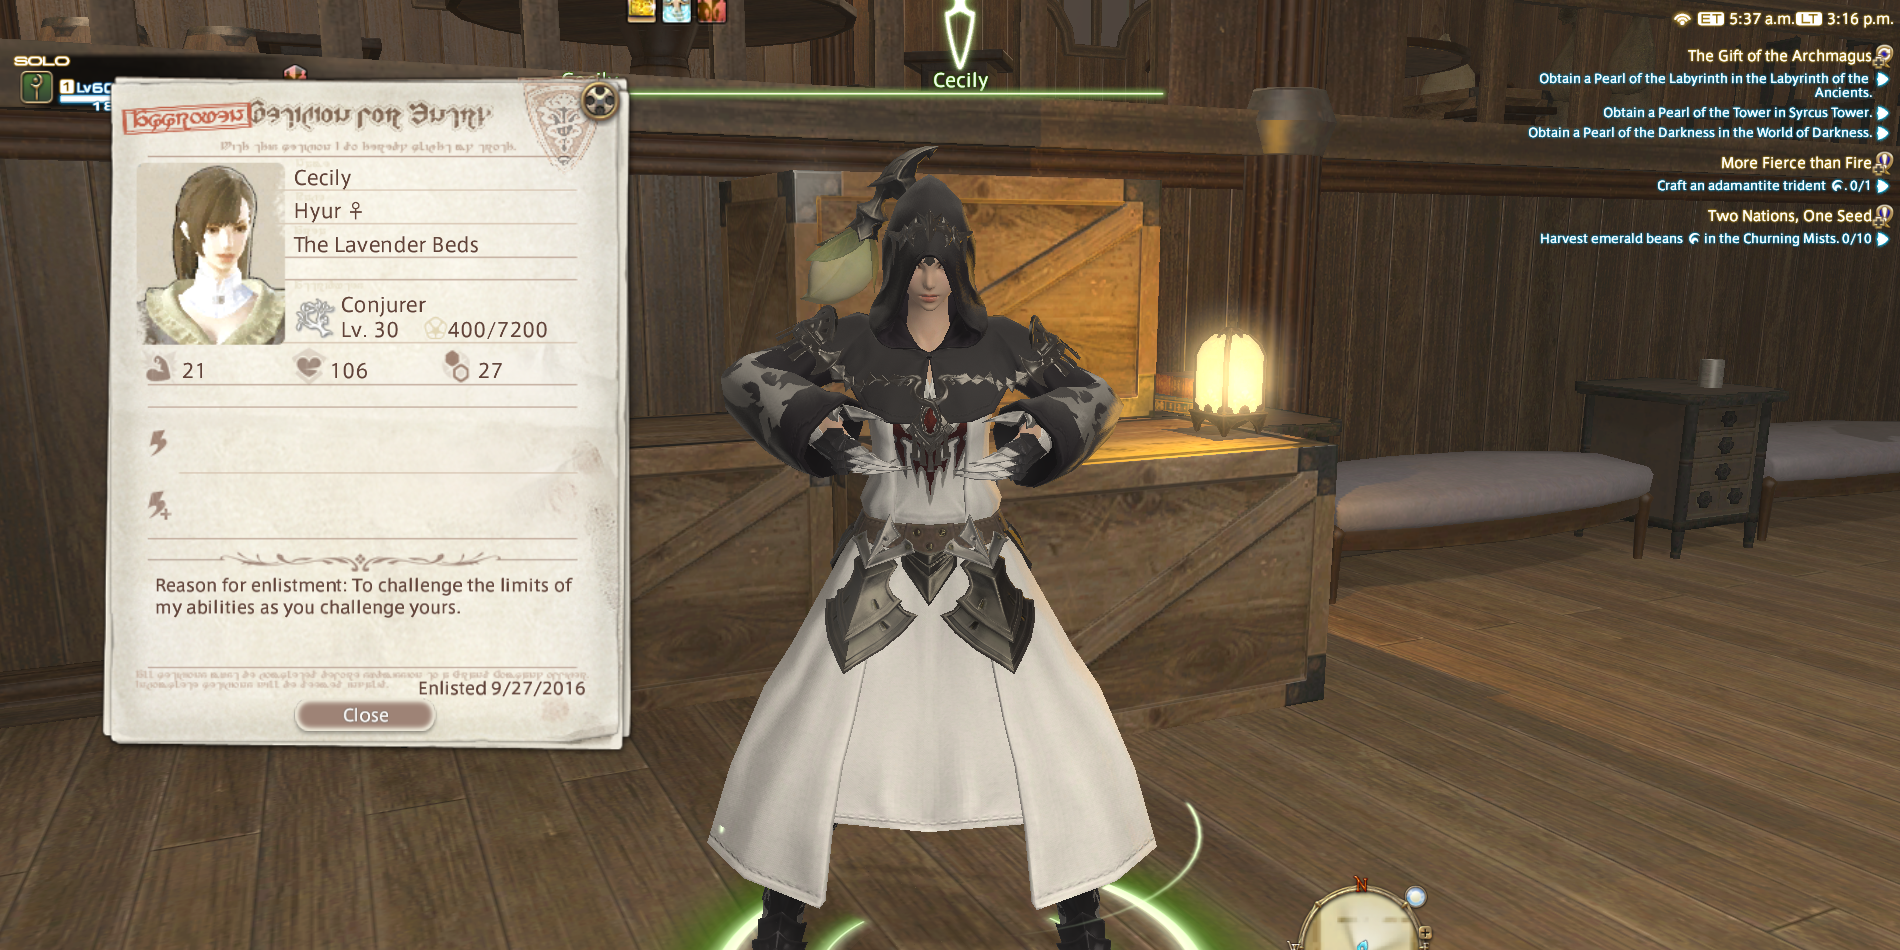 A player reaches Level 30, required for Jobs in Final Fantasy XIV